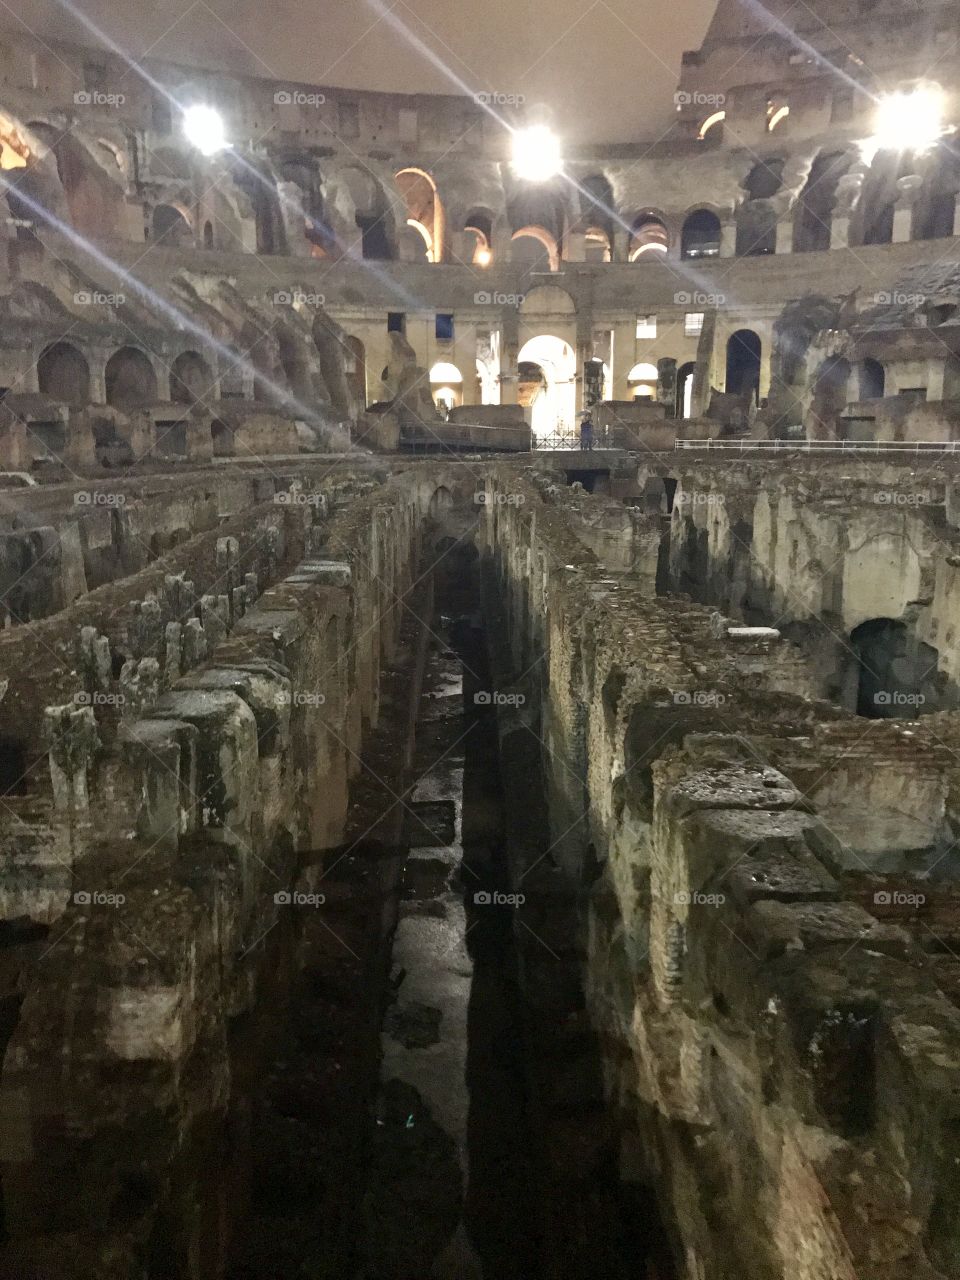 Standing on the arena floor of the Colosseum, this ancient wonder, was captivating!